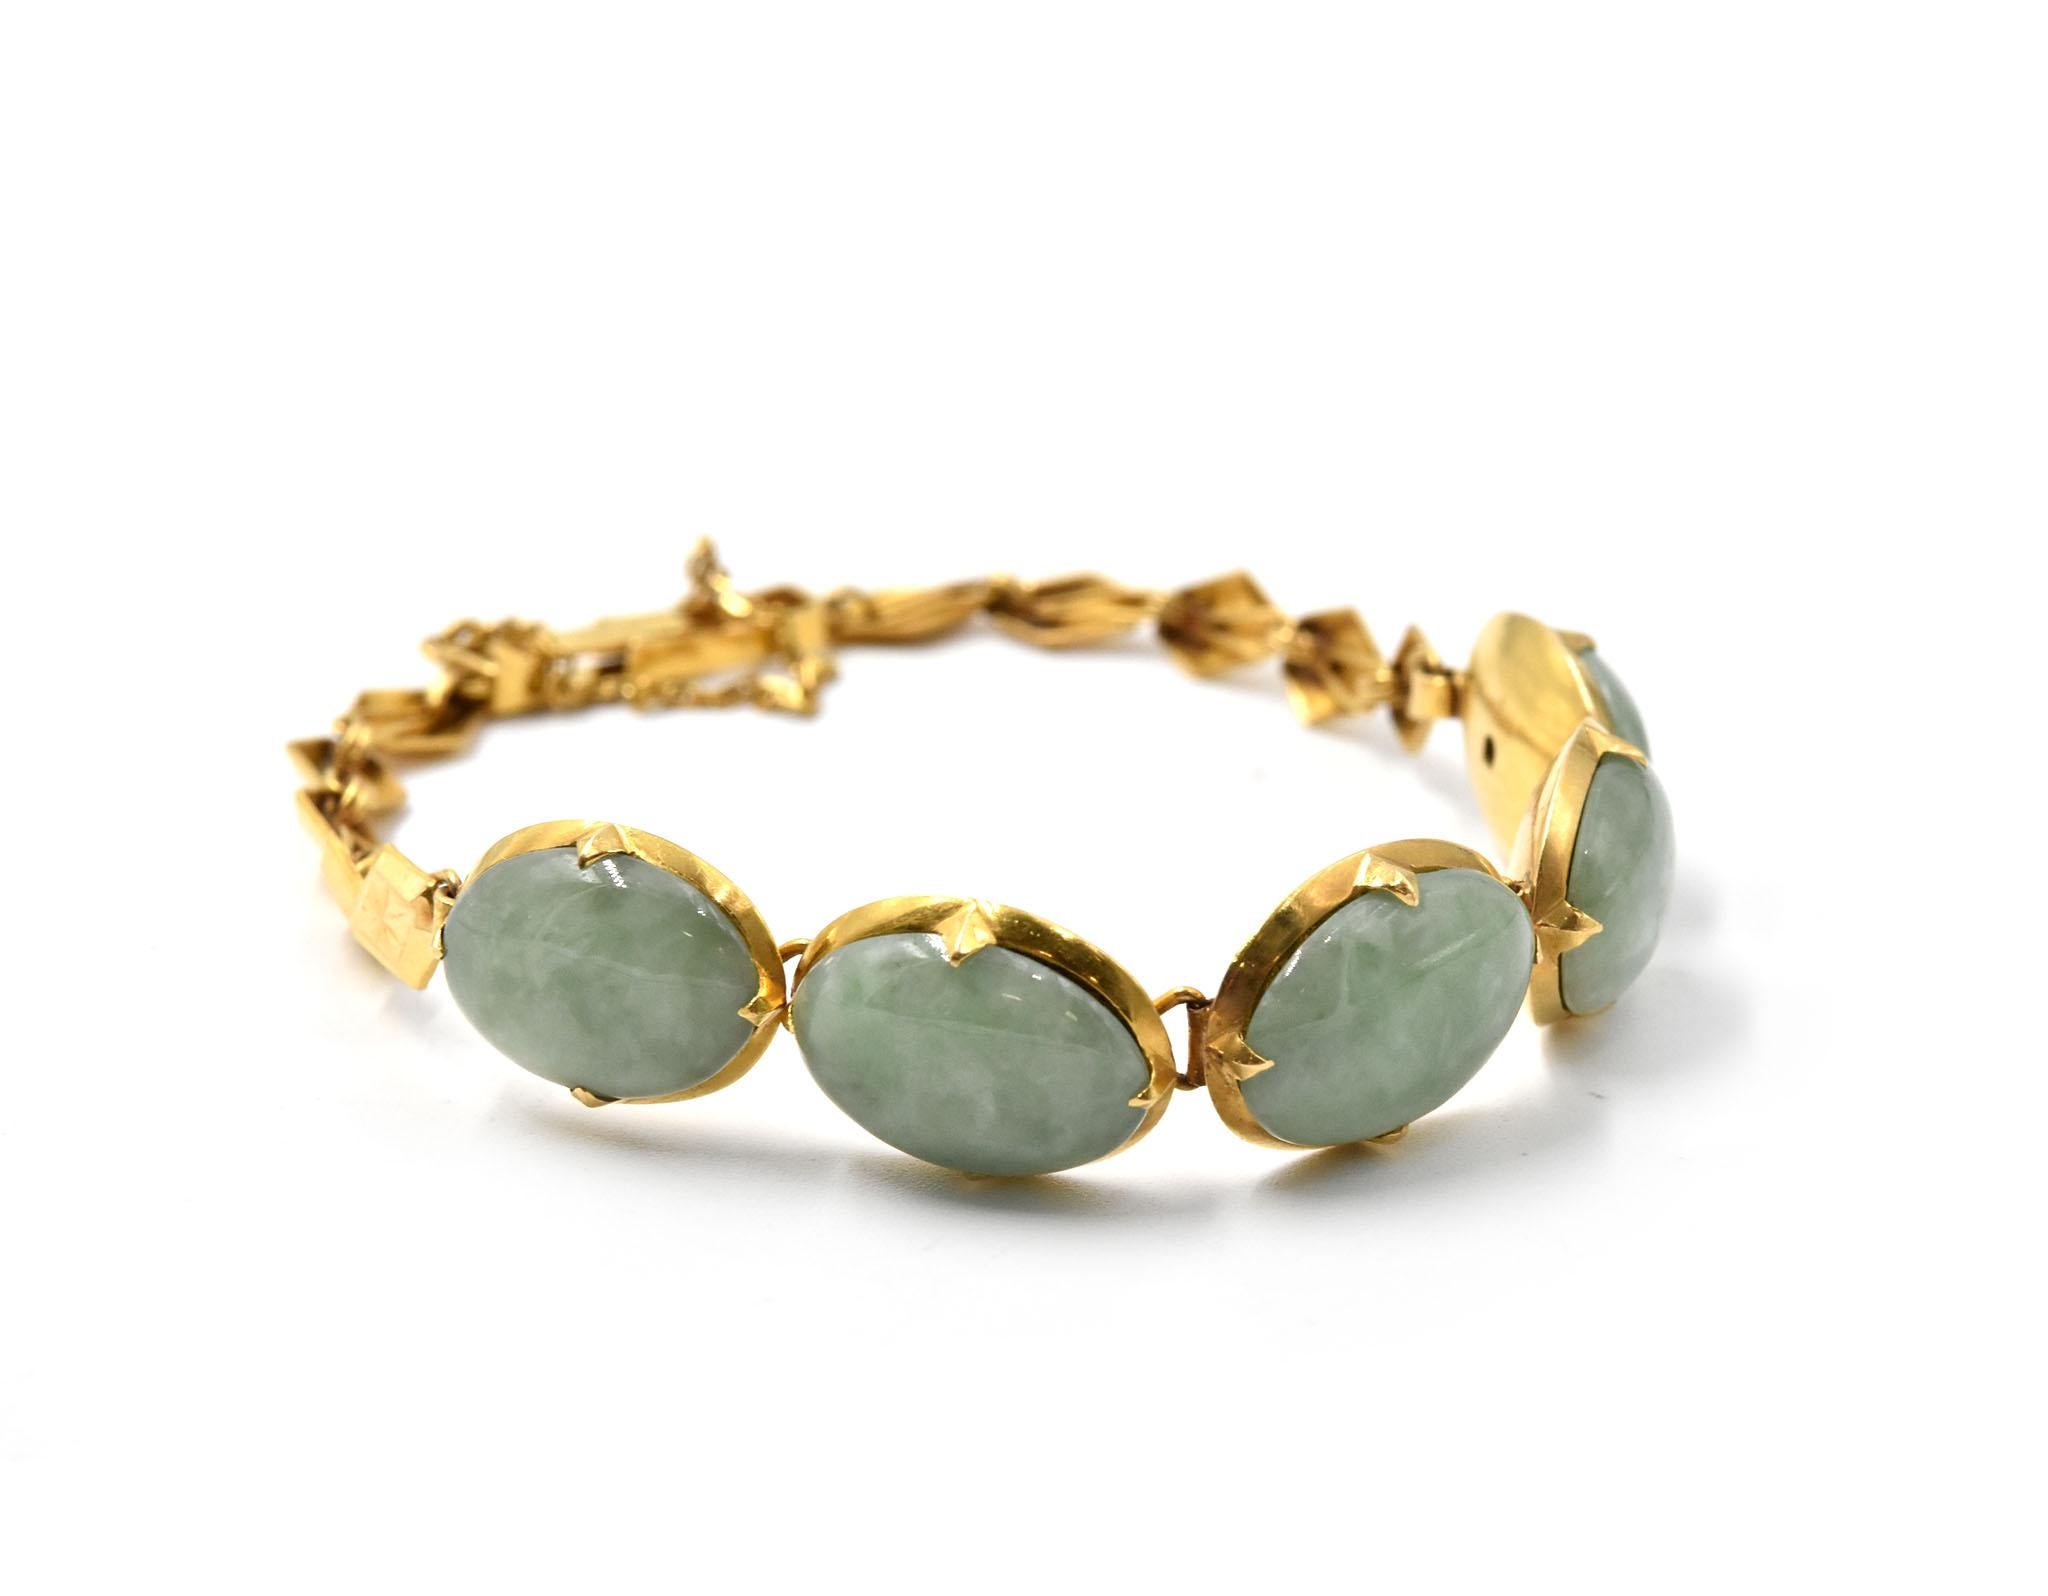 Designer: custom design
Material: 21k yellow gold with safety chain
Gemstones: cabochon oval shape jade stones
Dimensions: bracelet is 7-inch long x 3/8-inch wide
Weight: 11.00 grams
